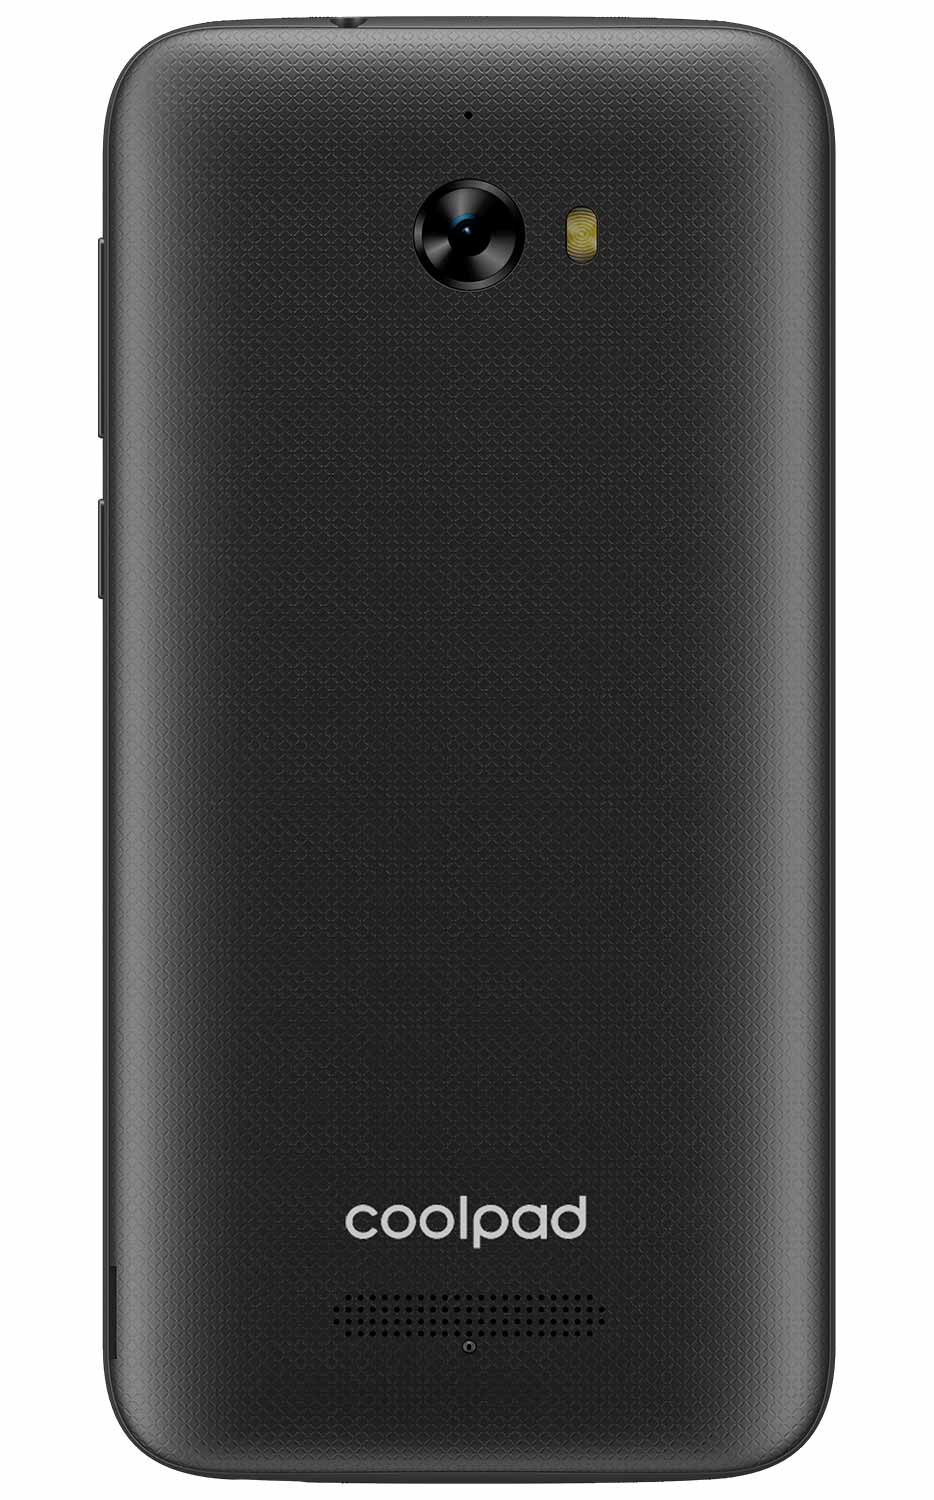 T-Mobile Online Store: Coolpad Defiant is on deal for $100 2